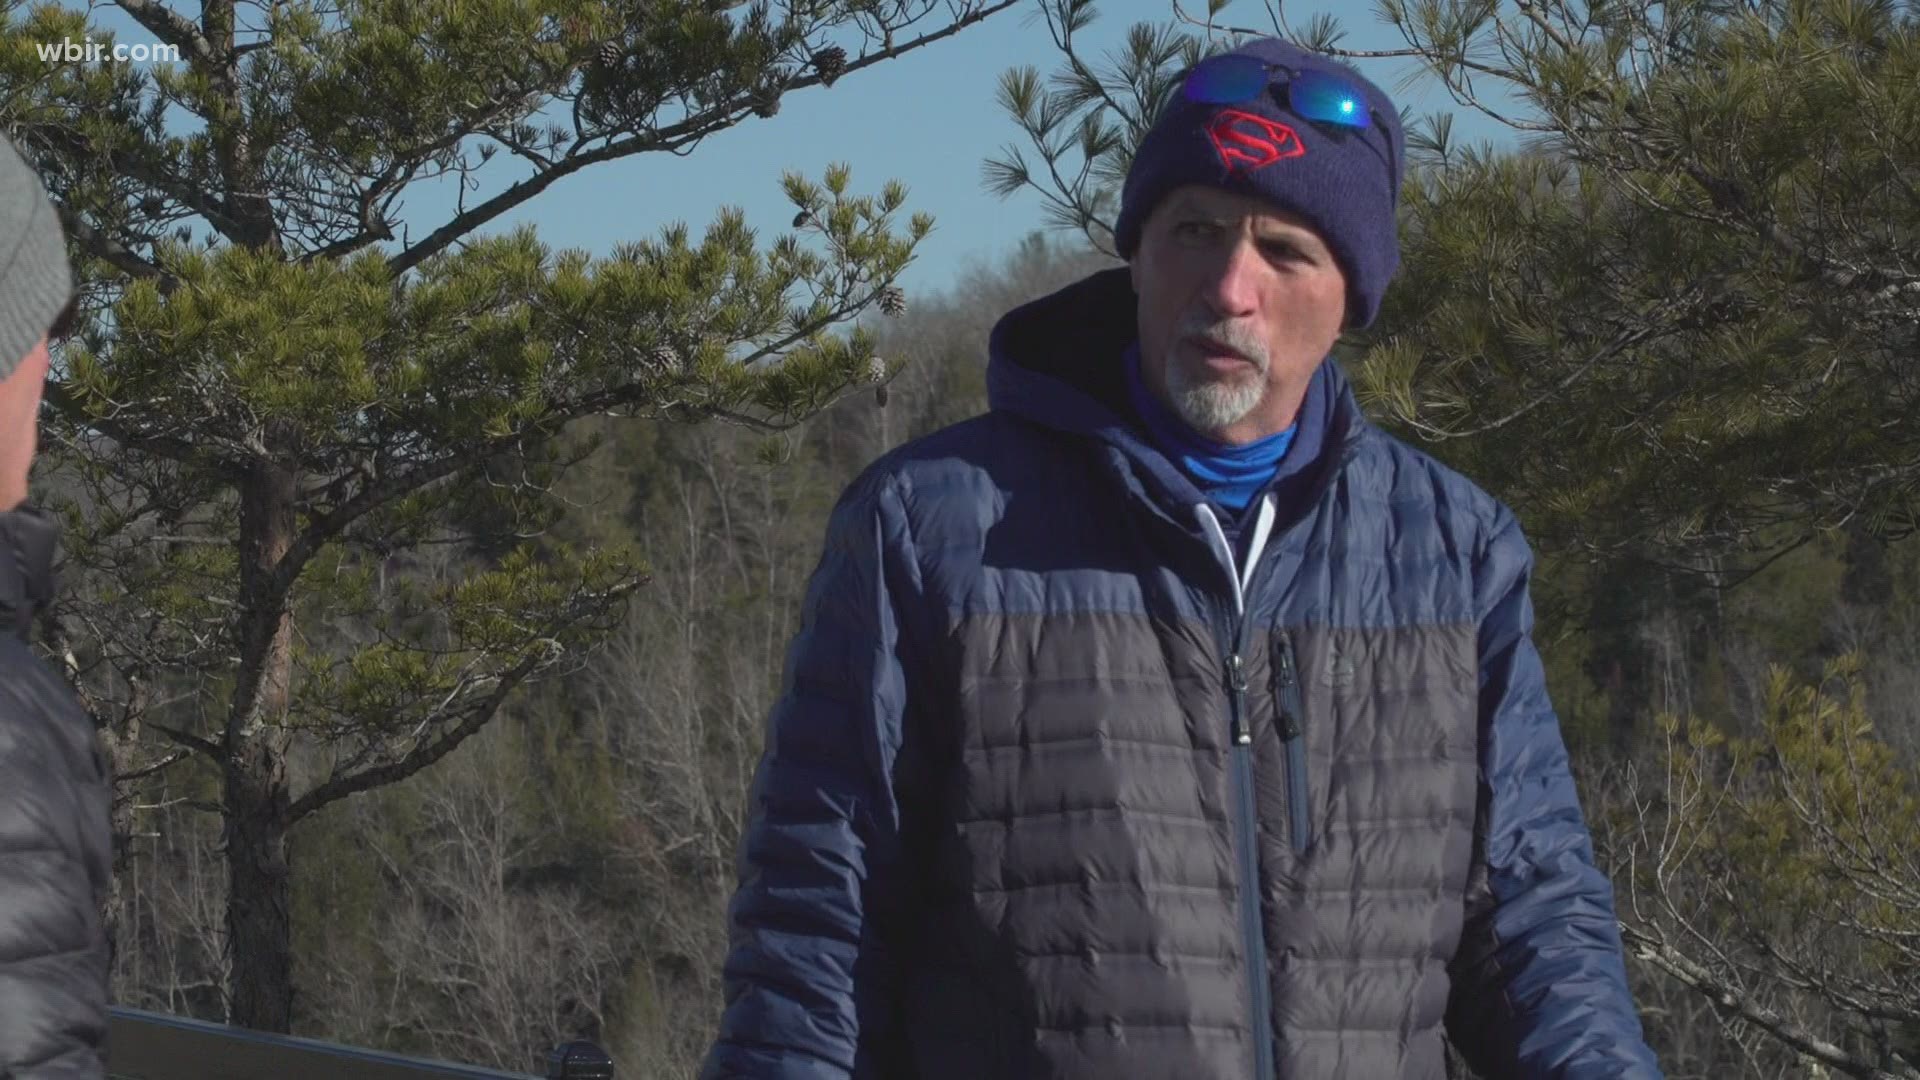 Gerry Hallcox underwent double bypass surgery a year ago, but now he's out on the trails multiple times a week.